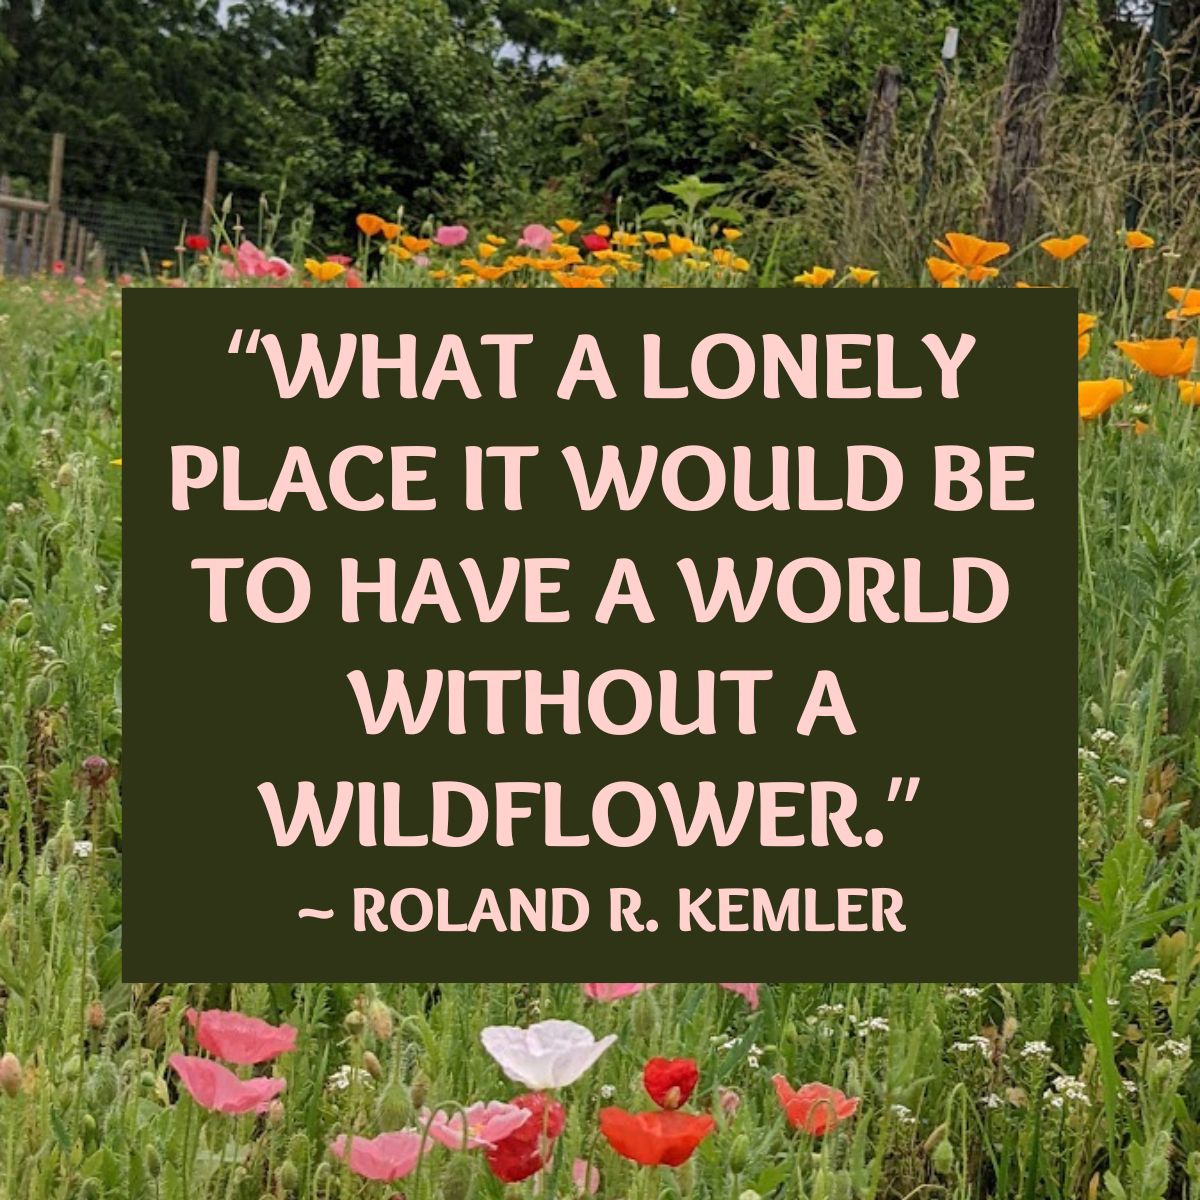 Wildflower quote: “What a lonely place it would be to have a world without a wildflower.” 